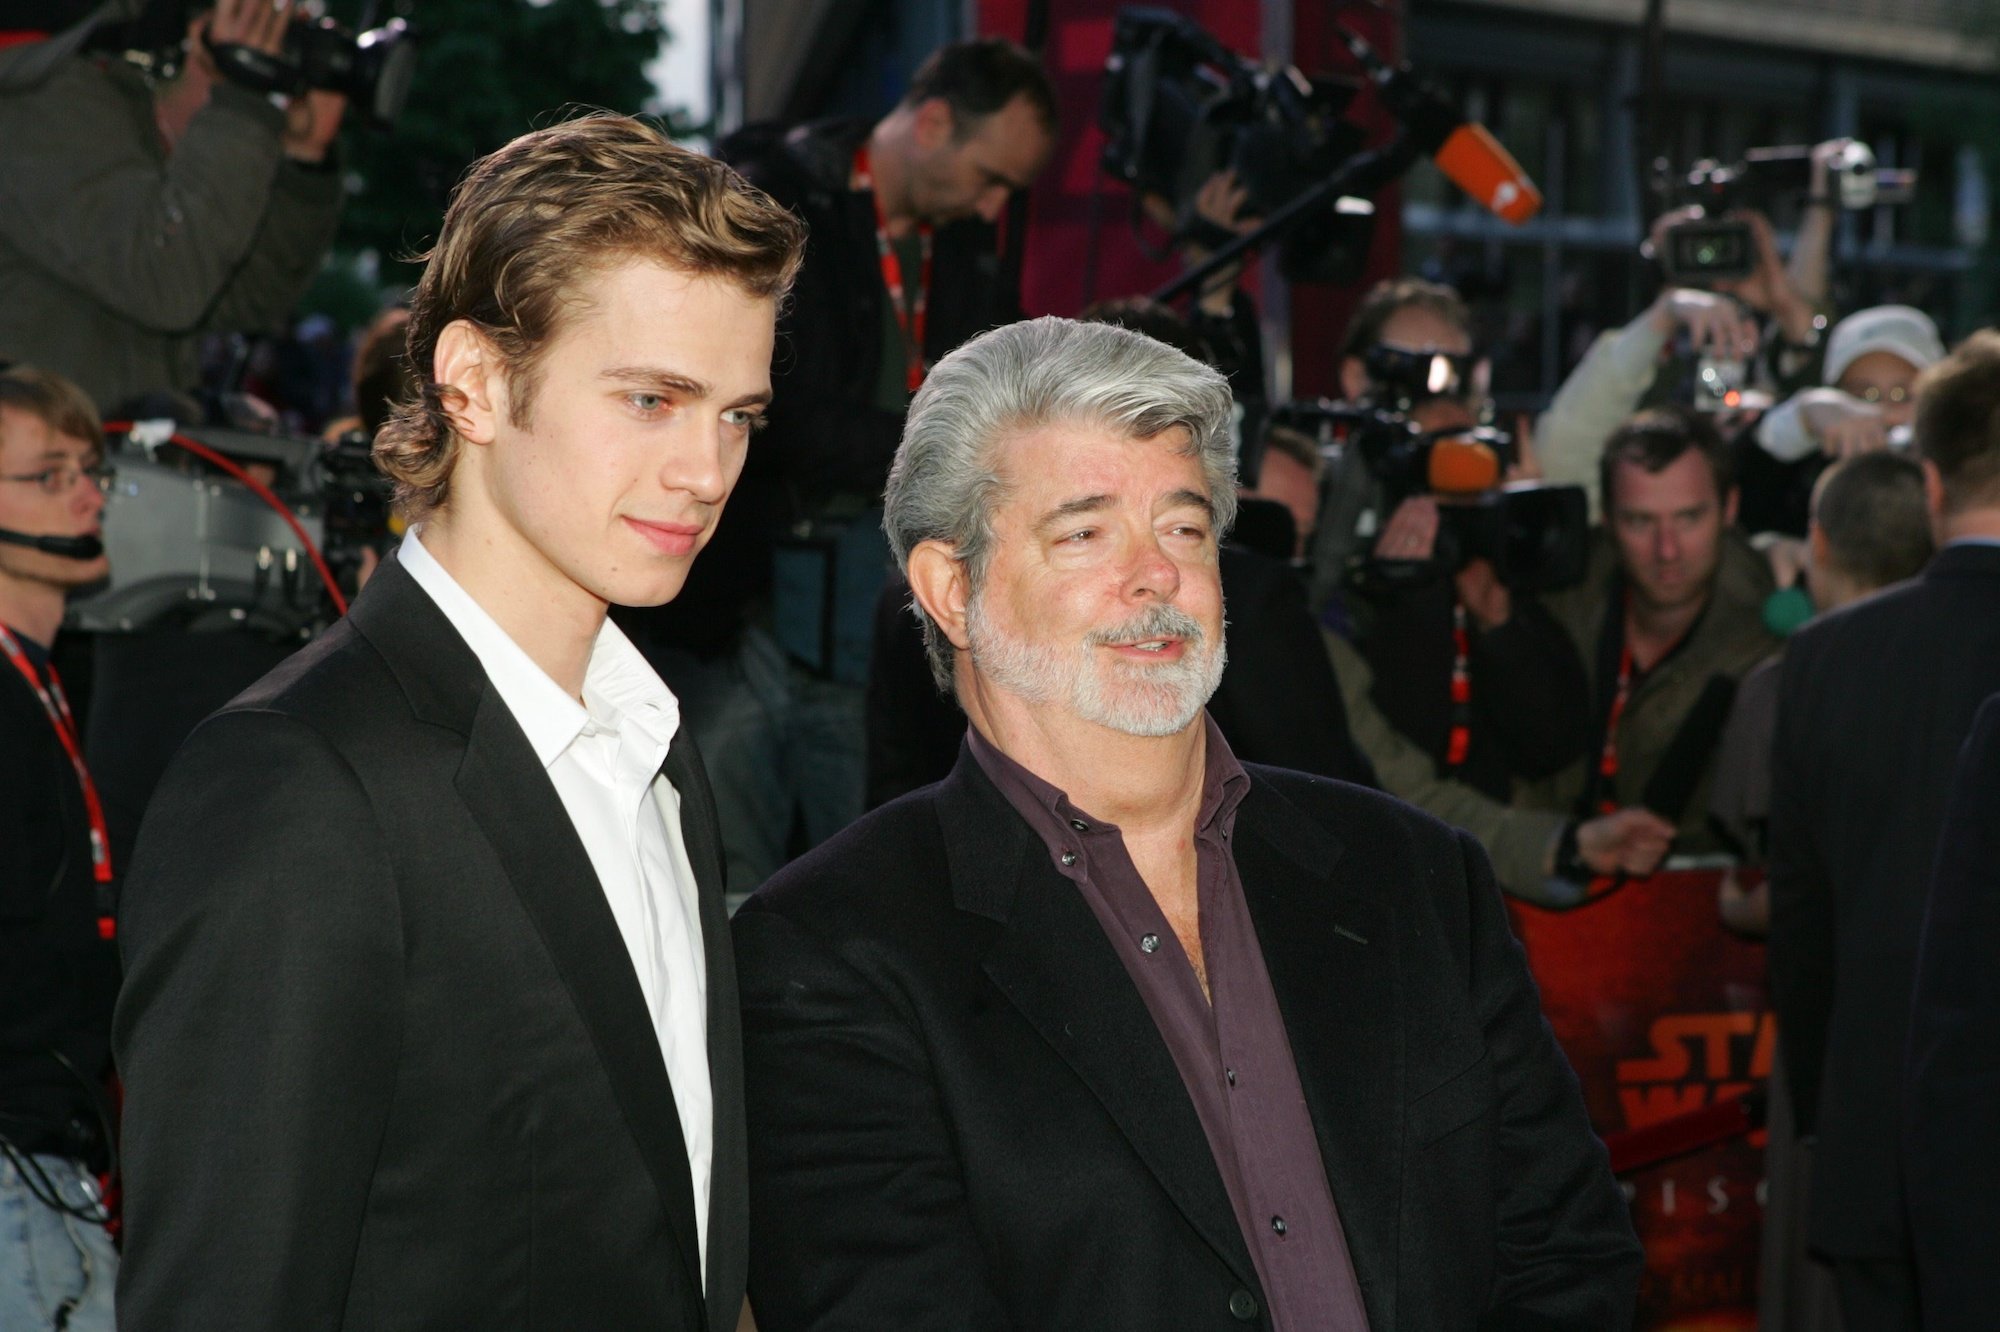 (L-R) Hayden Christensen and George Lucas in front of a crowd